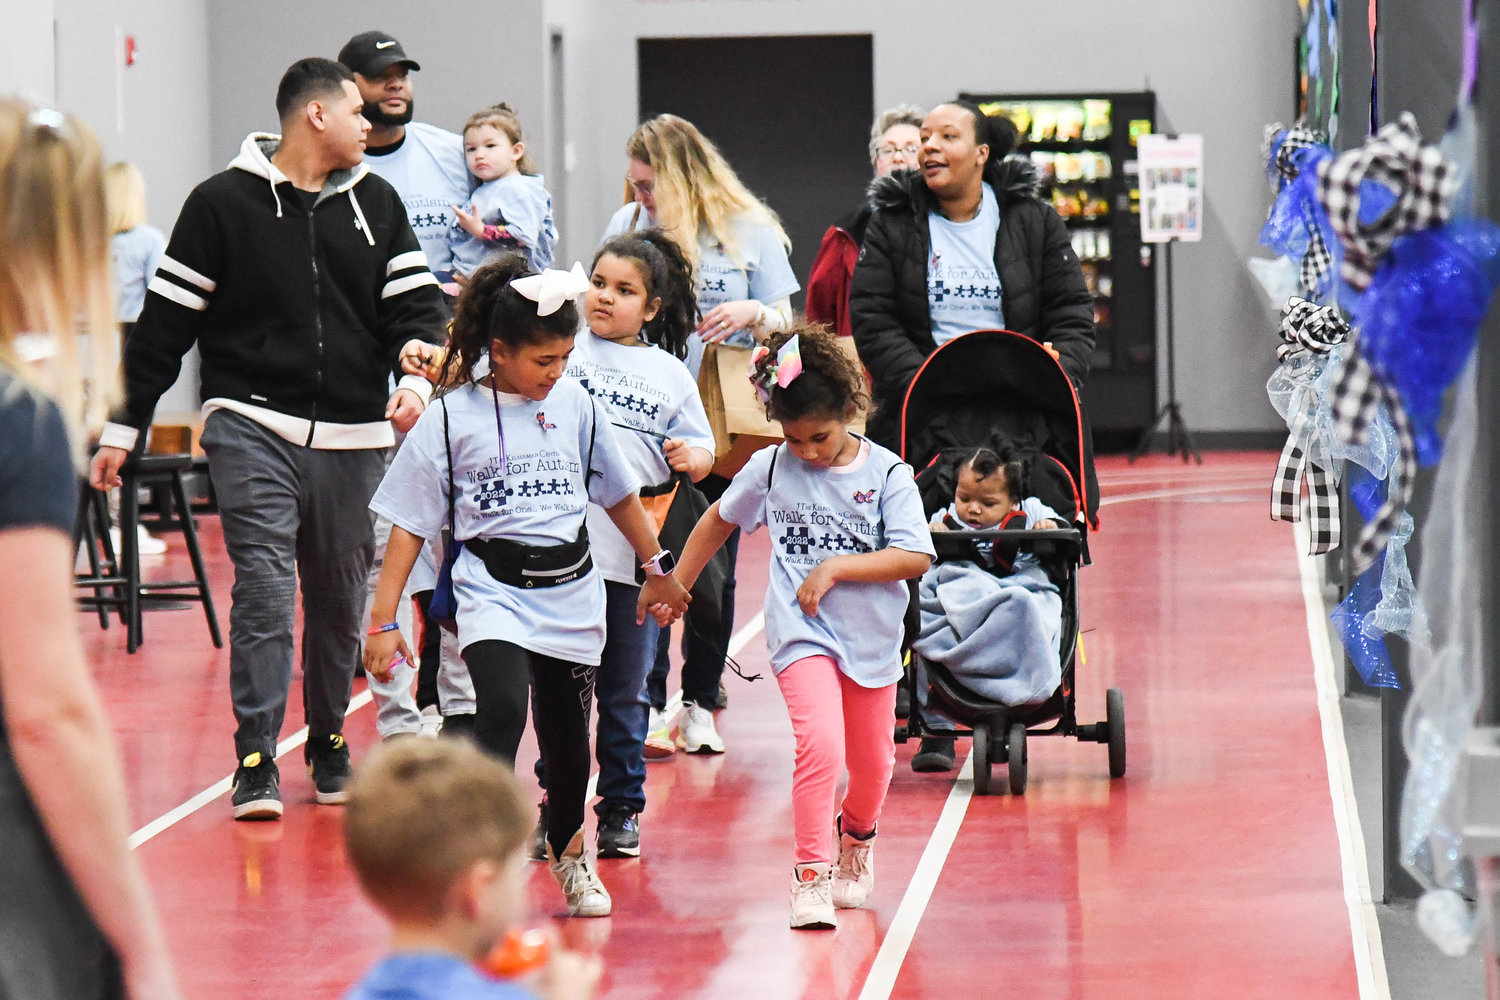 Families participate in the annual Walk for Autism on Saturday at The Fitness Mill in Utica. Guests walked laps around the indoor track and those who could not attend were able to participate virtually. The goal of the event is to raise funds for the programs the Kelberman Center provides and to raise autism awareness.